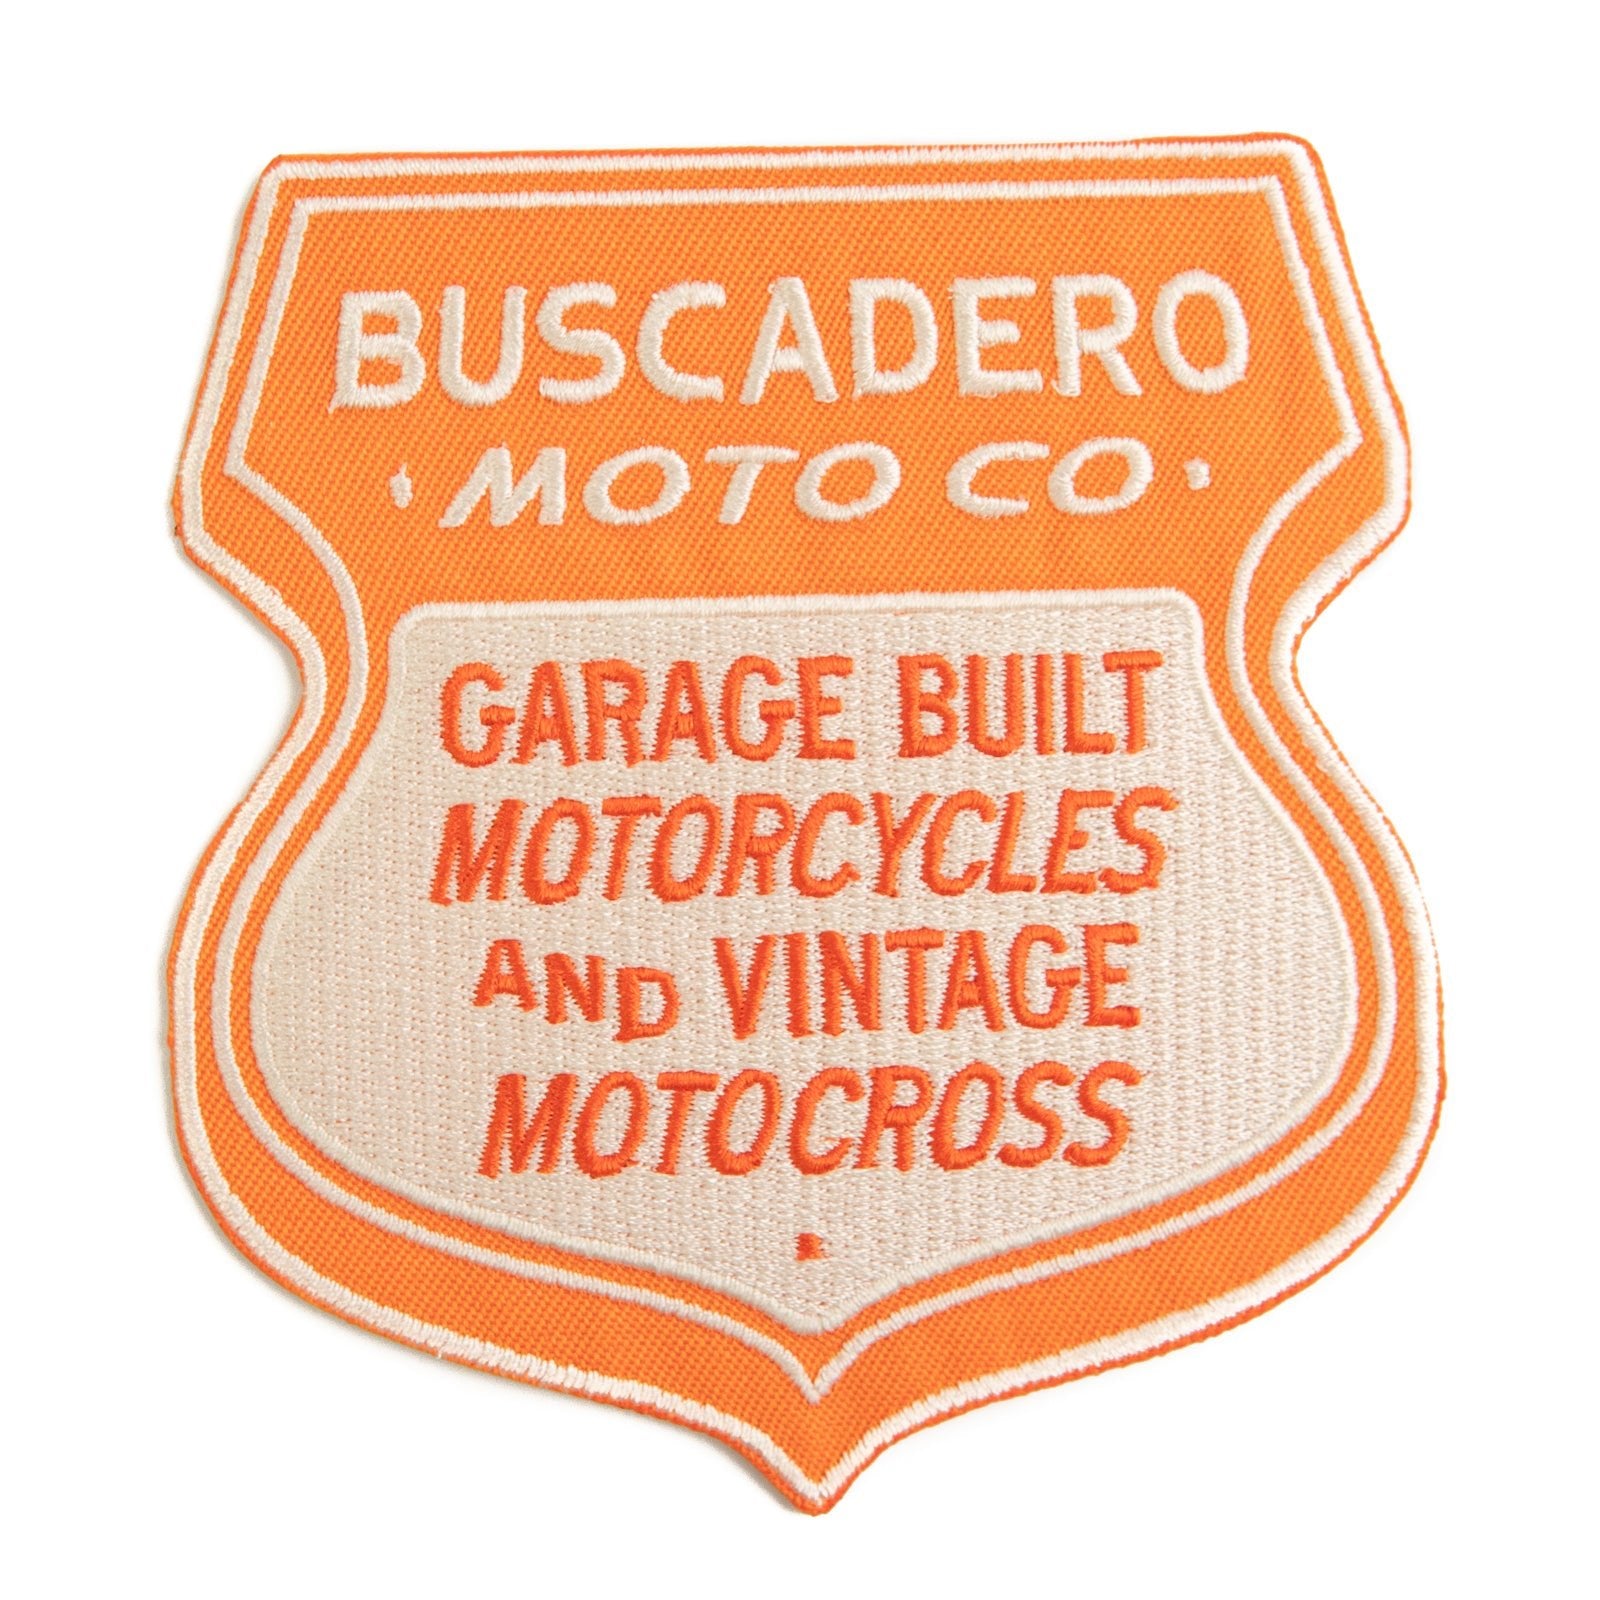 Embroidered Iron-on Patches - 2 Pack - Buscadero Motorcycles